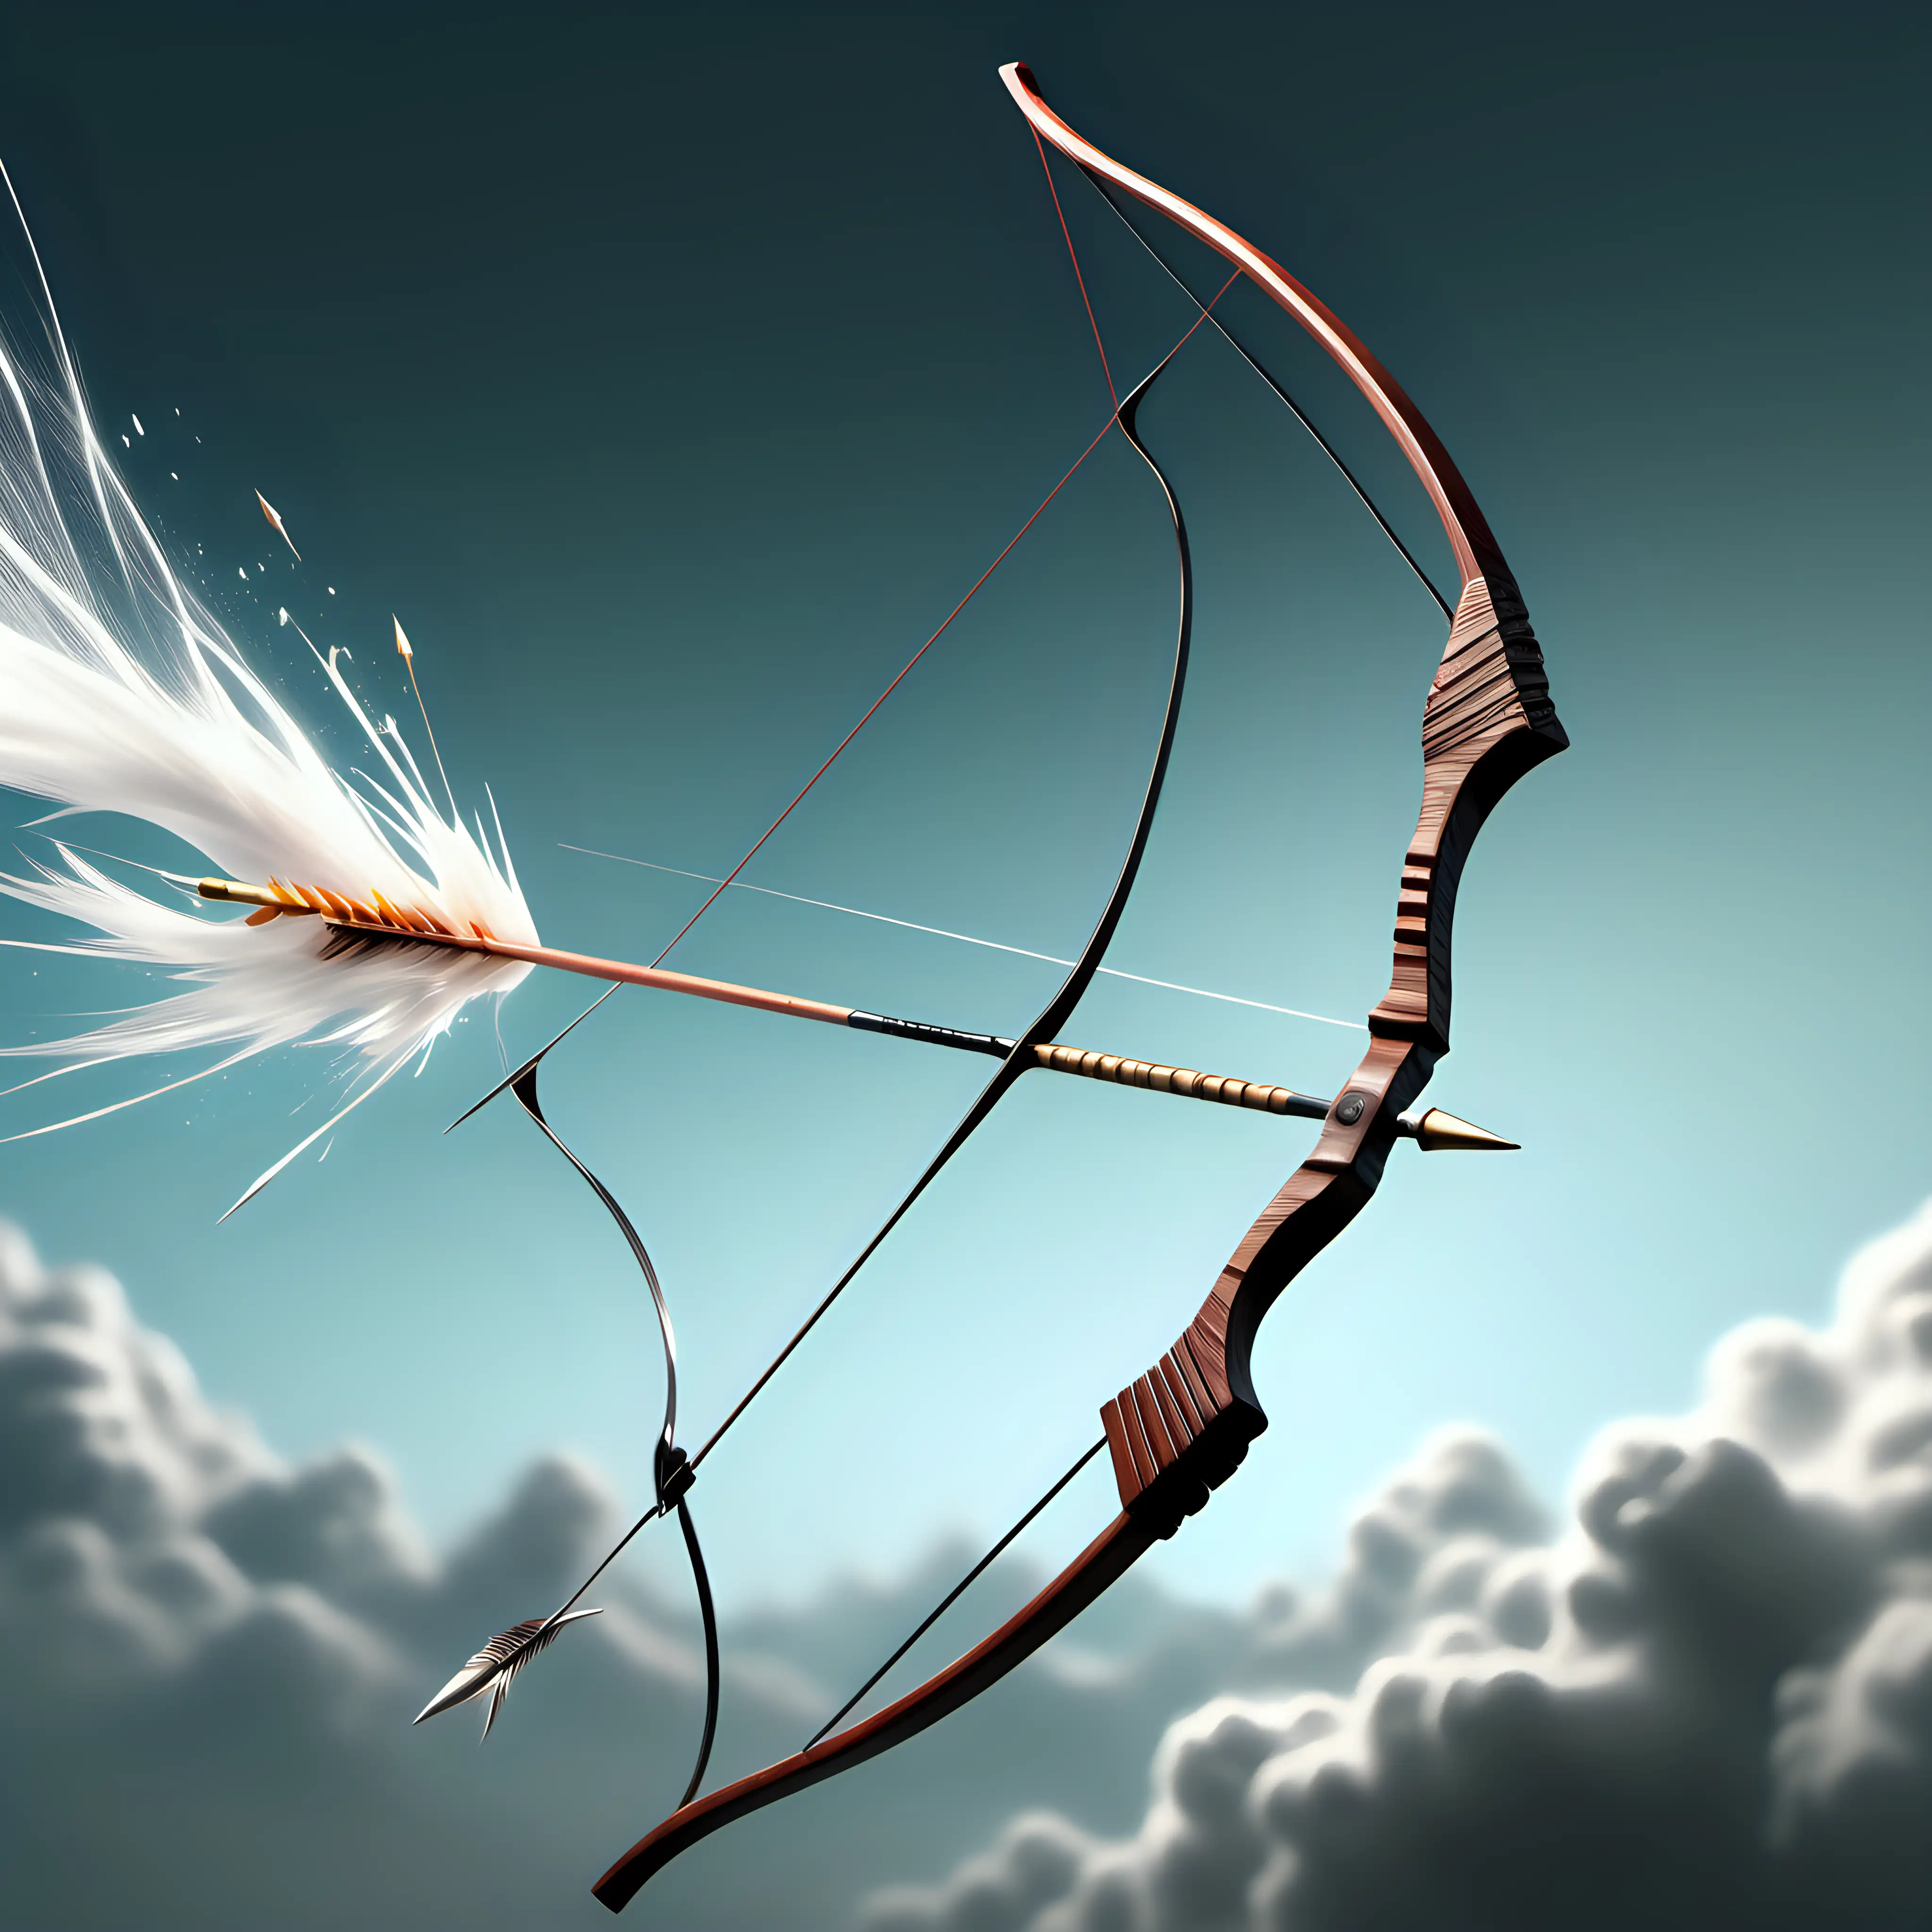 A bow shooting an arrow through the gusting wind with a transparent background